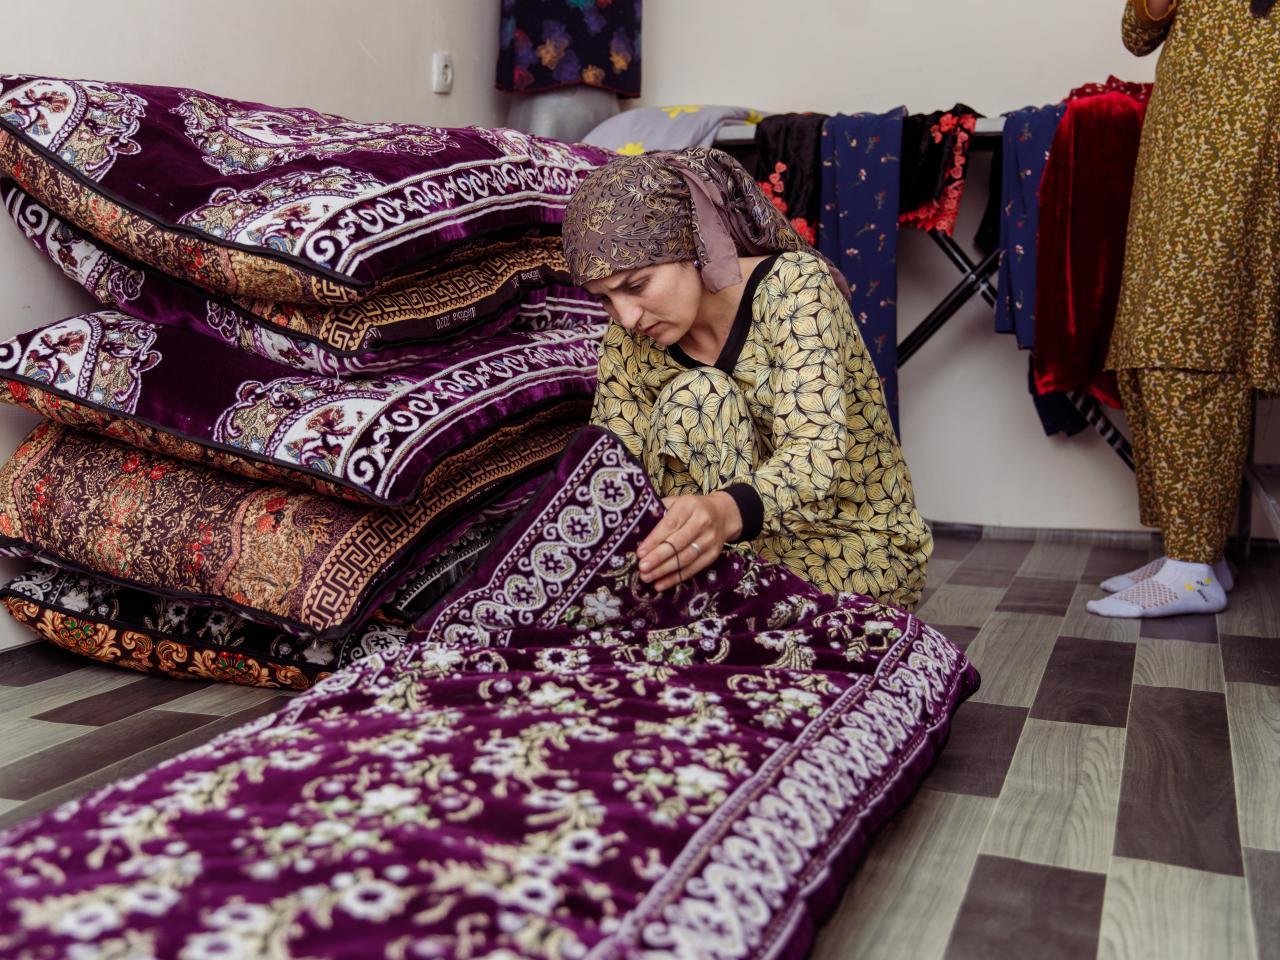 Woman inspecting decorative rugs